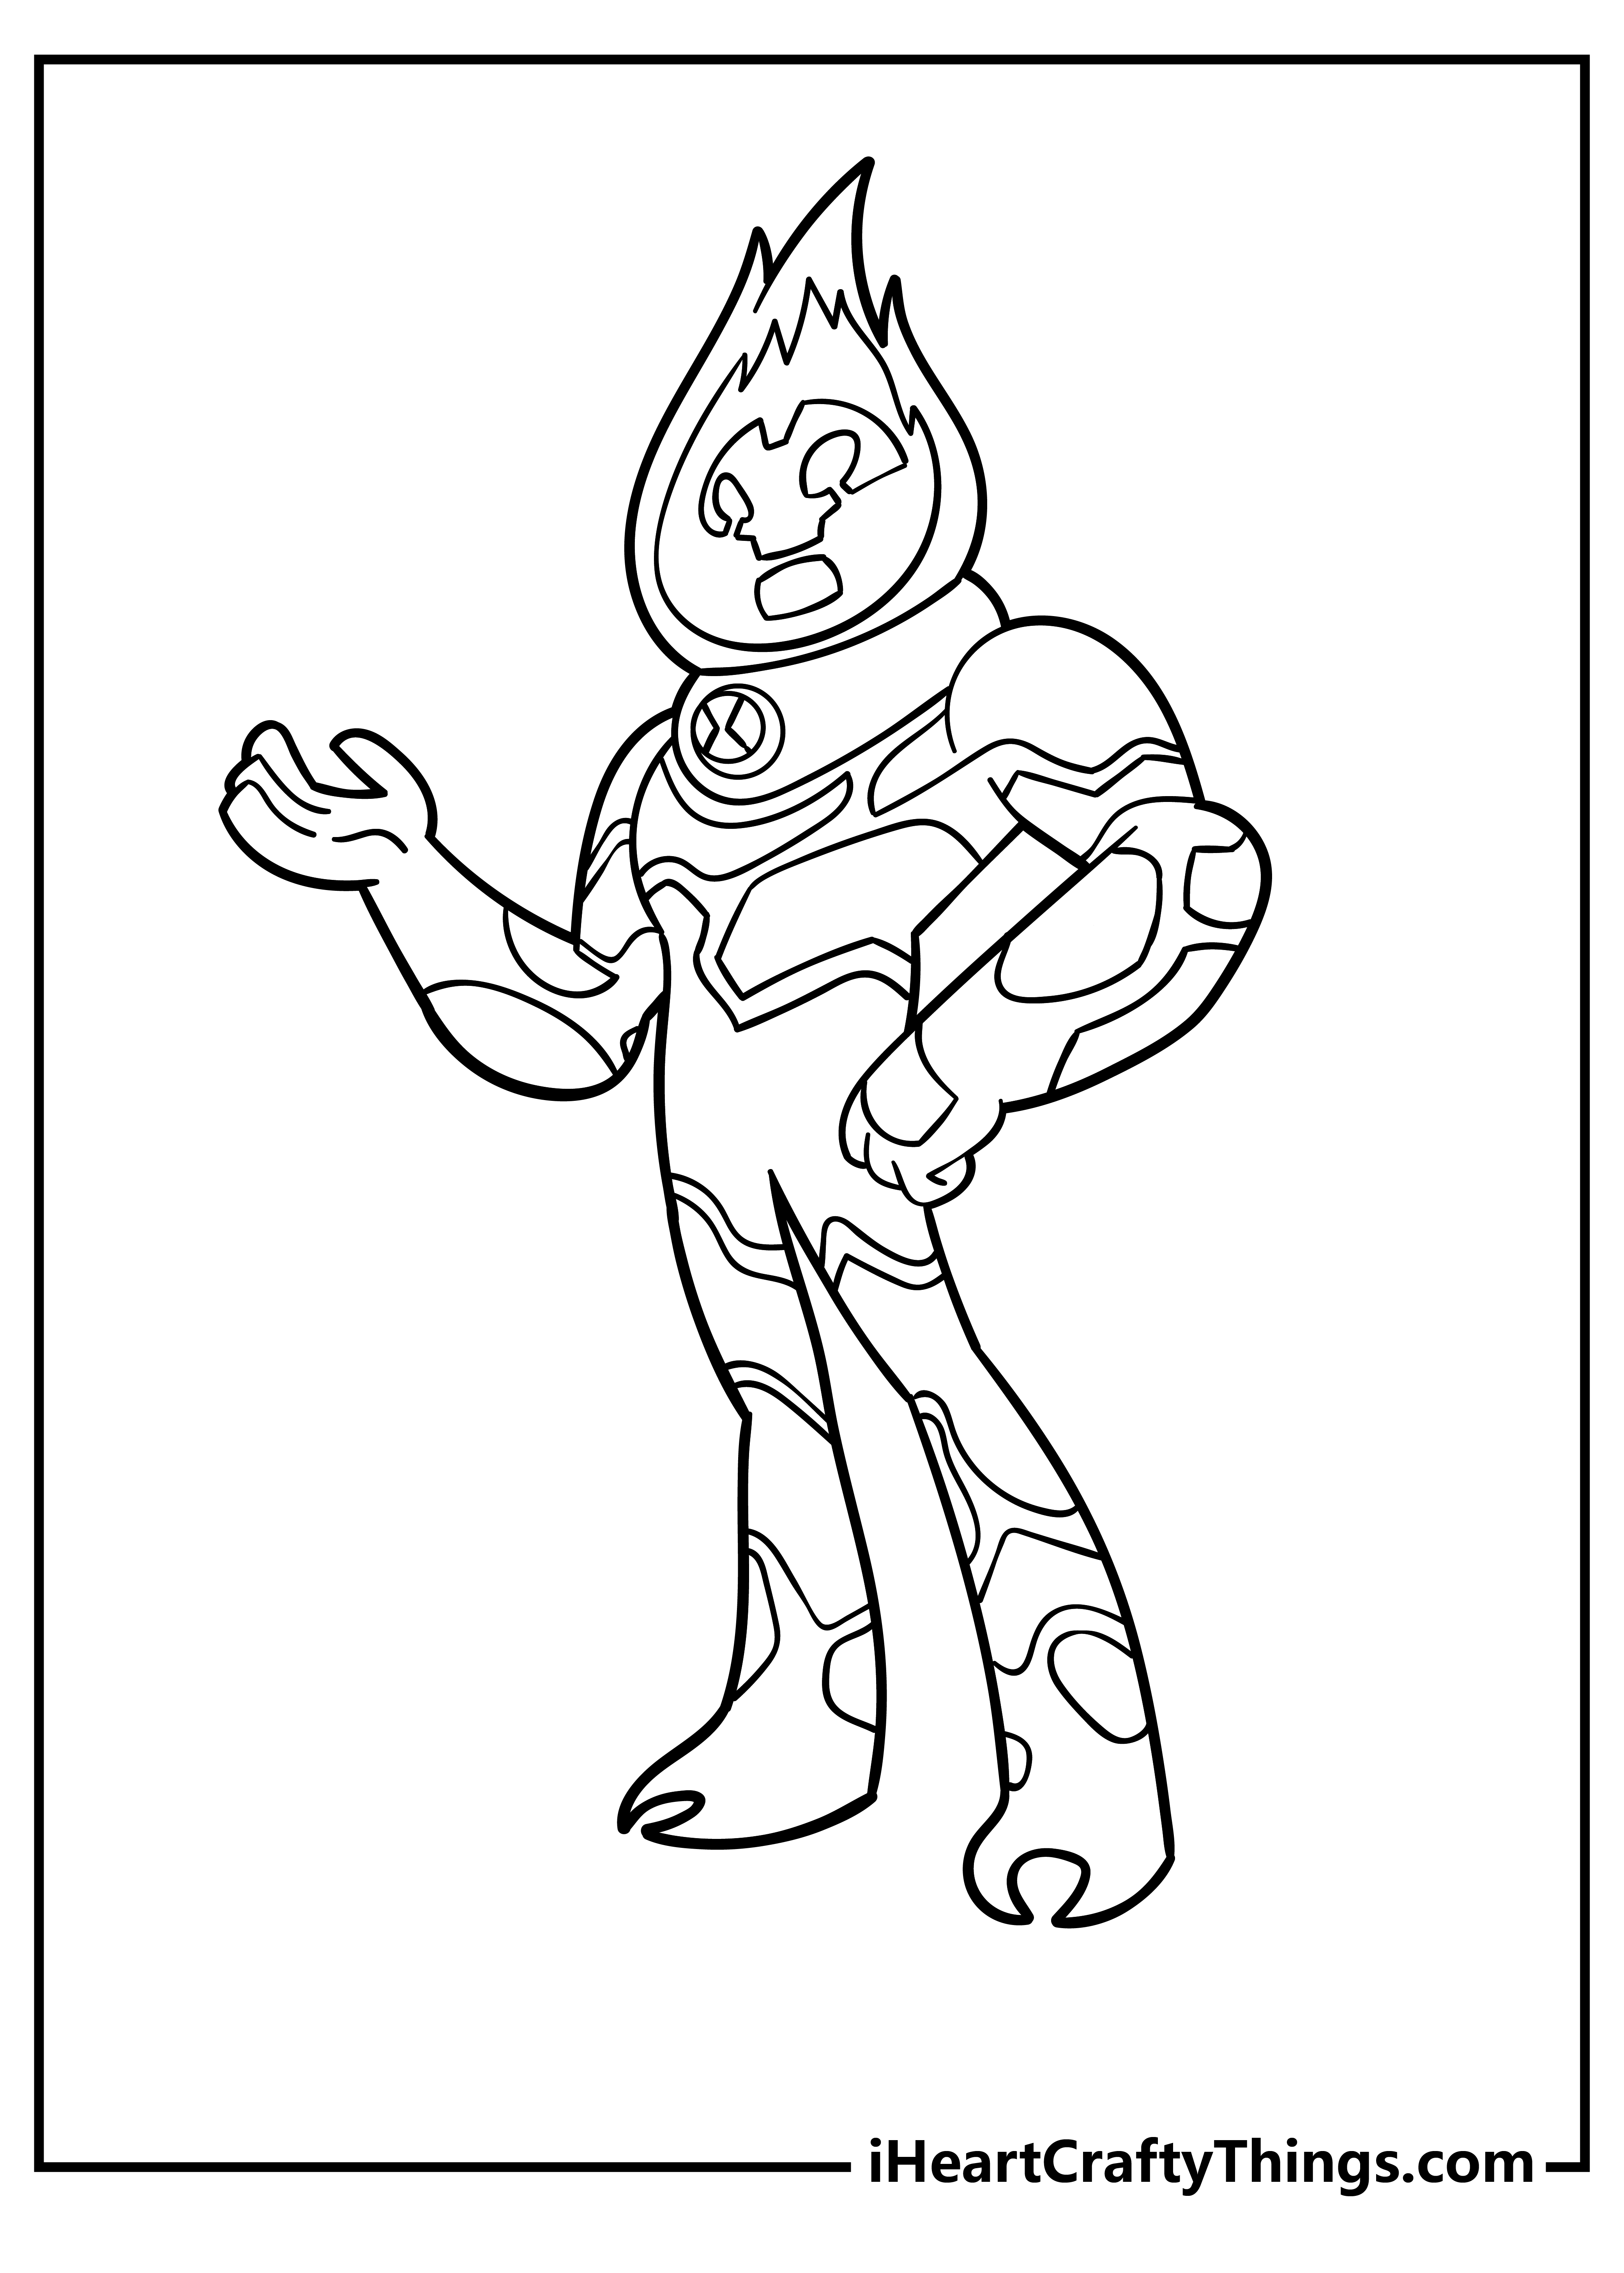 Superheroes Coloring Pages for adults free printable